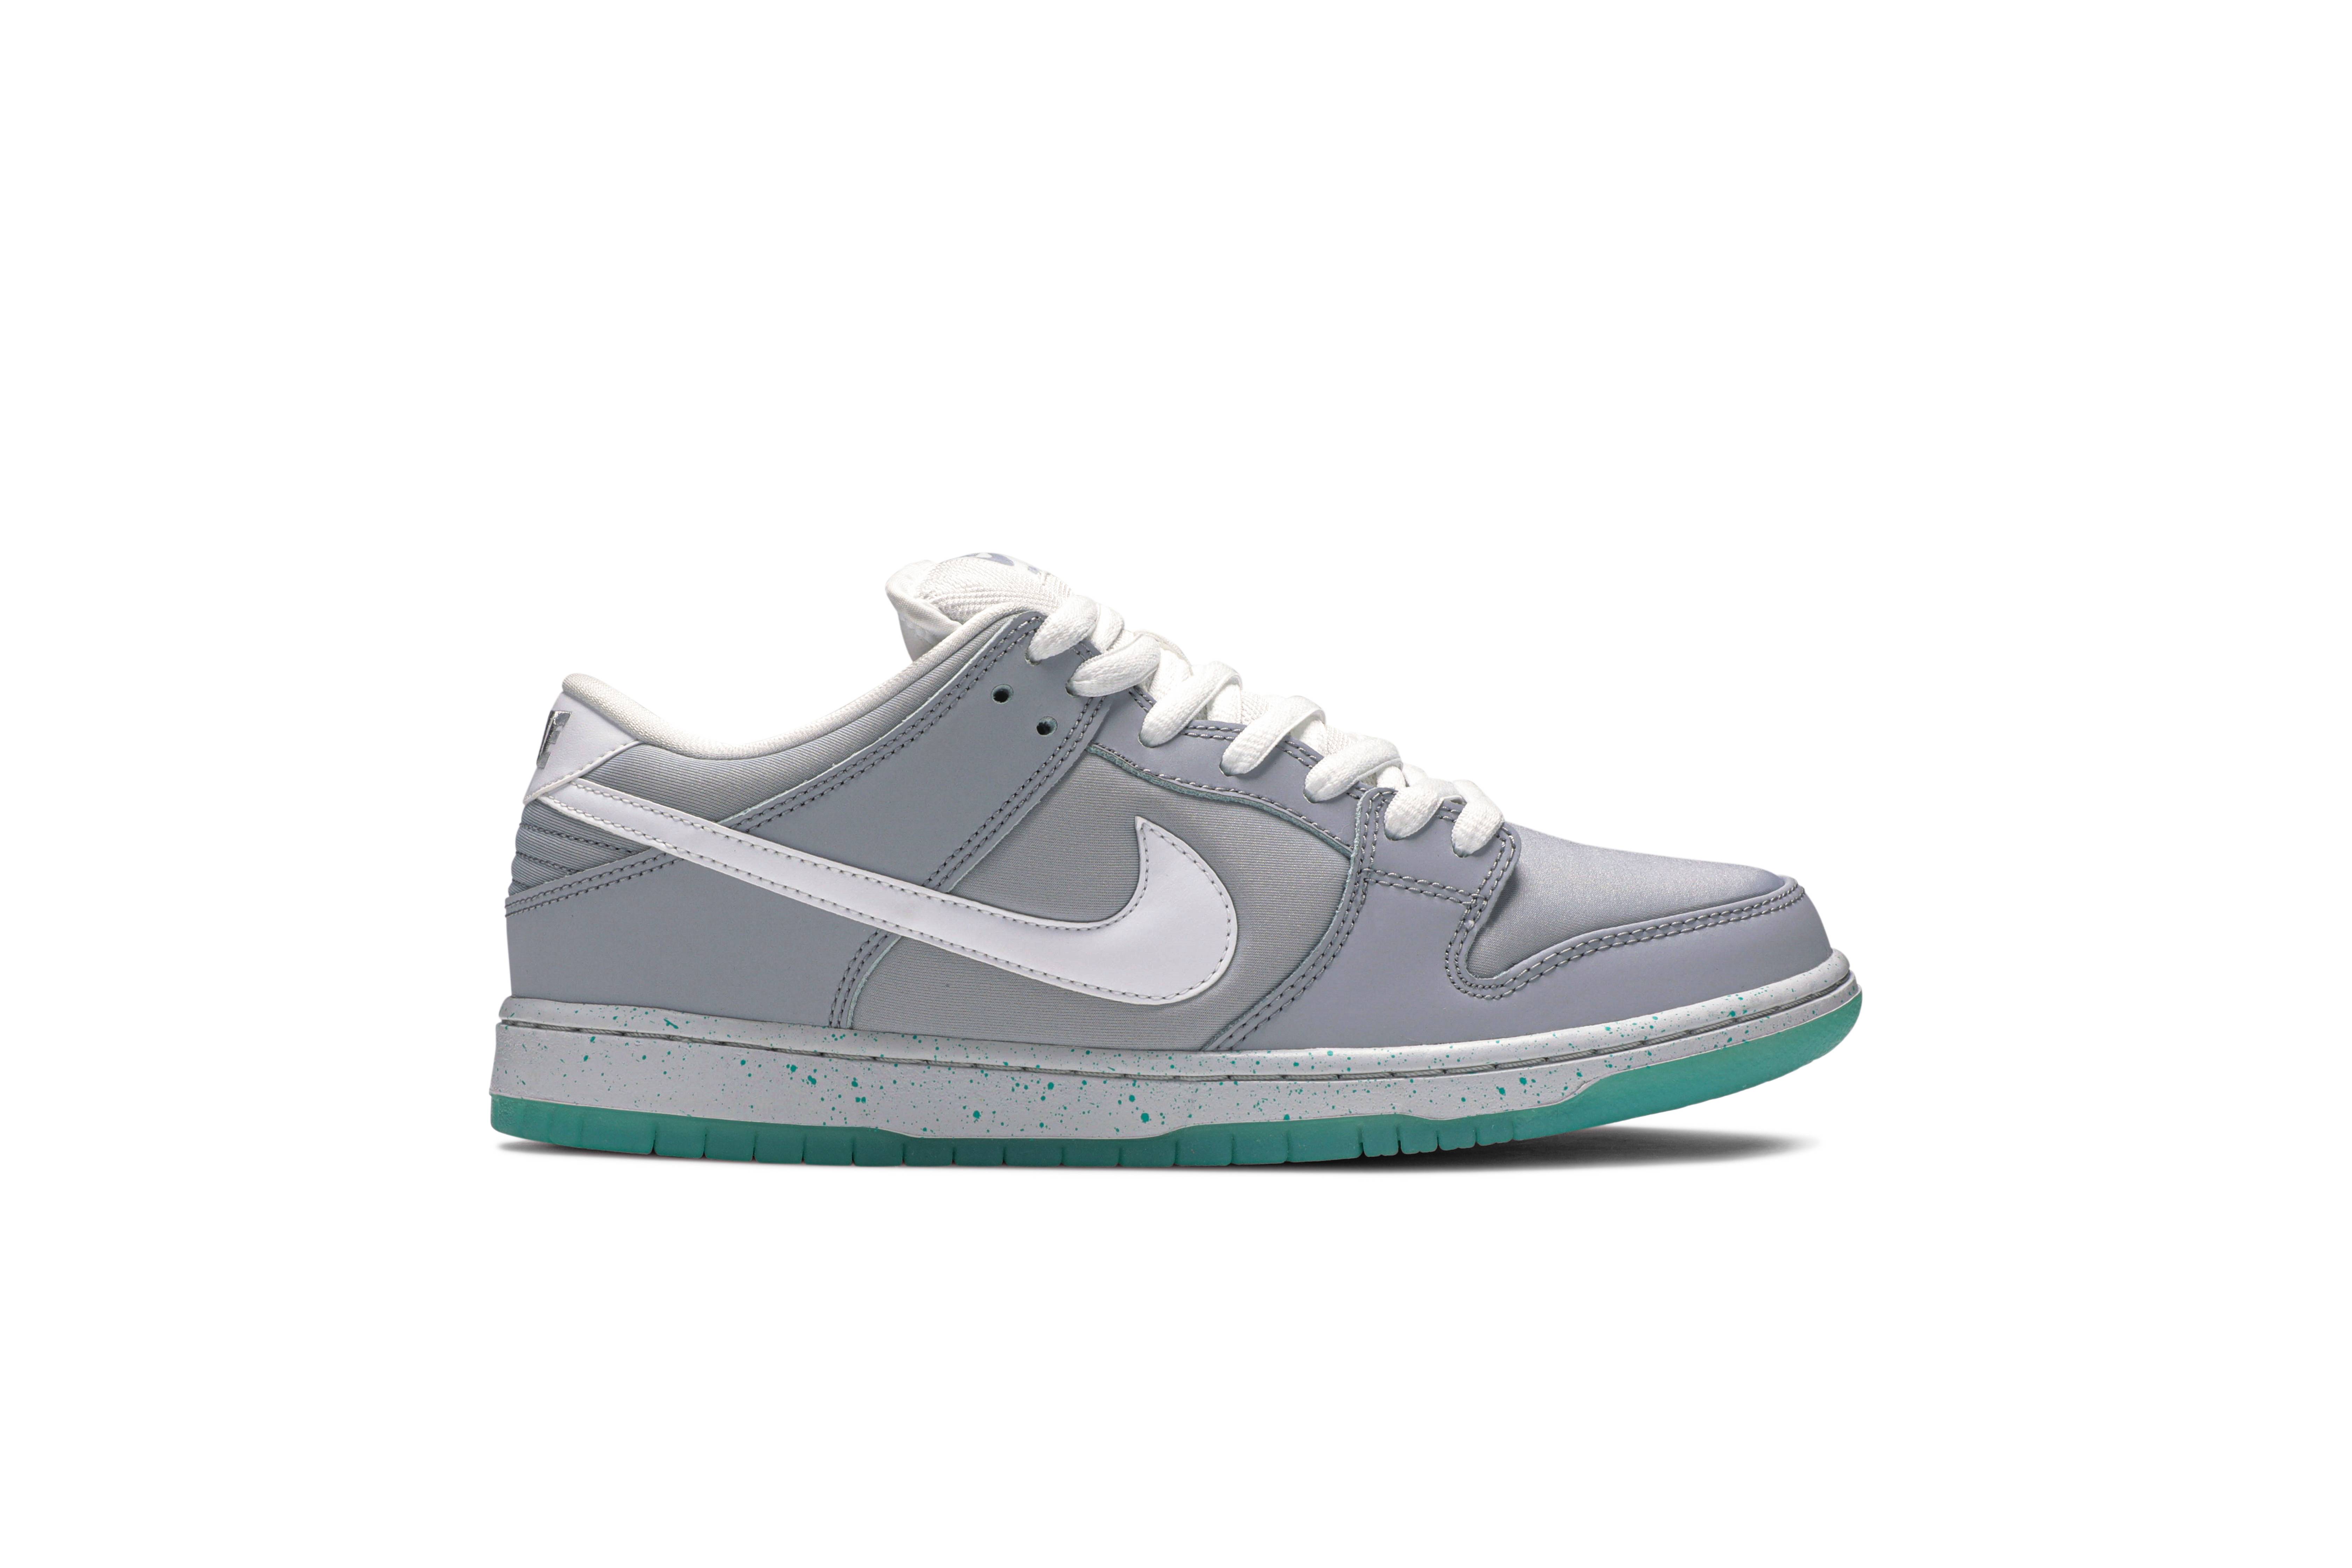 Nike SB Dunk Low Marty McFly - 313170 